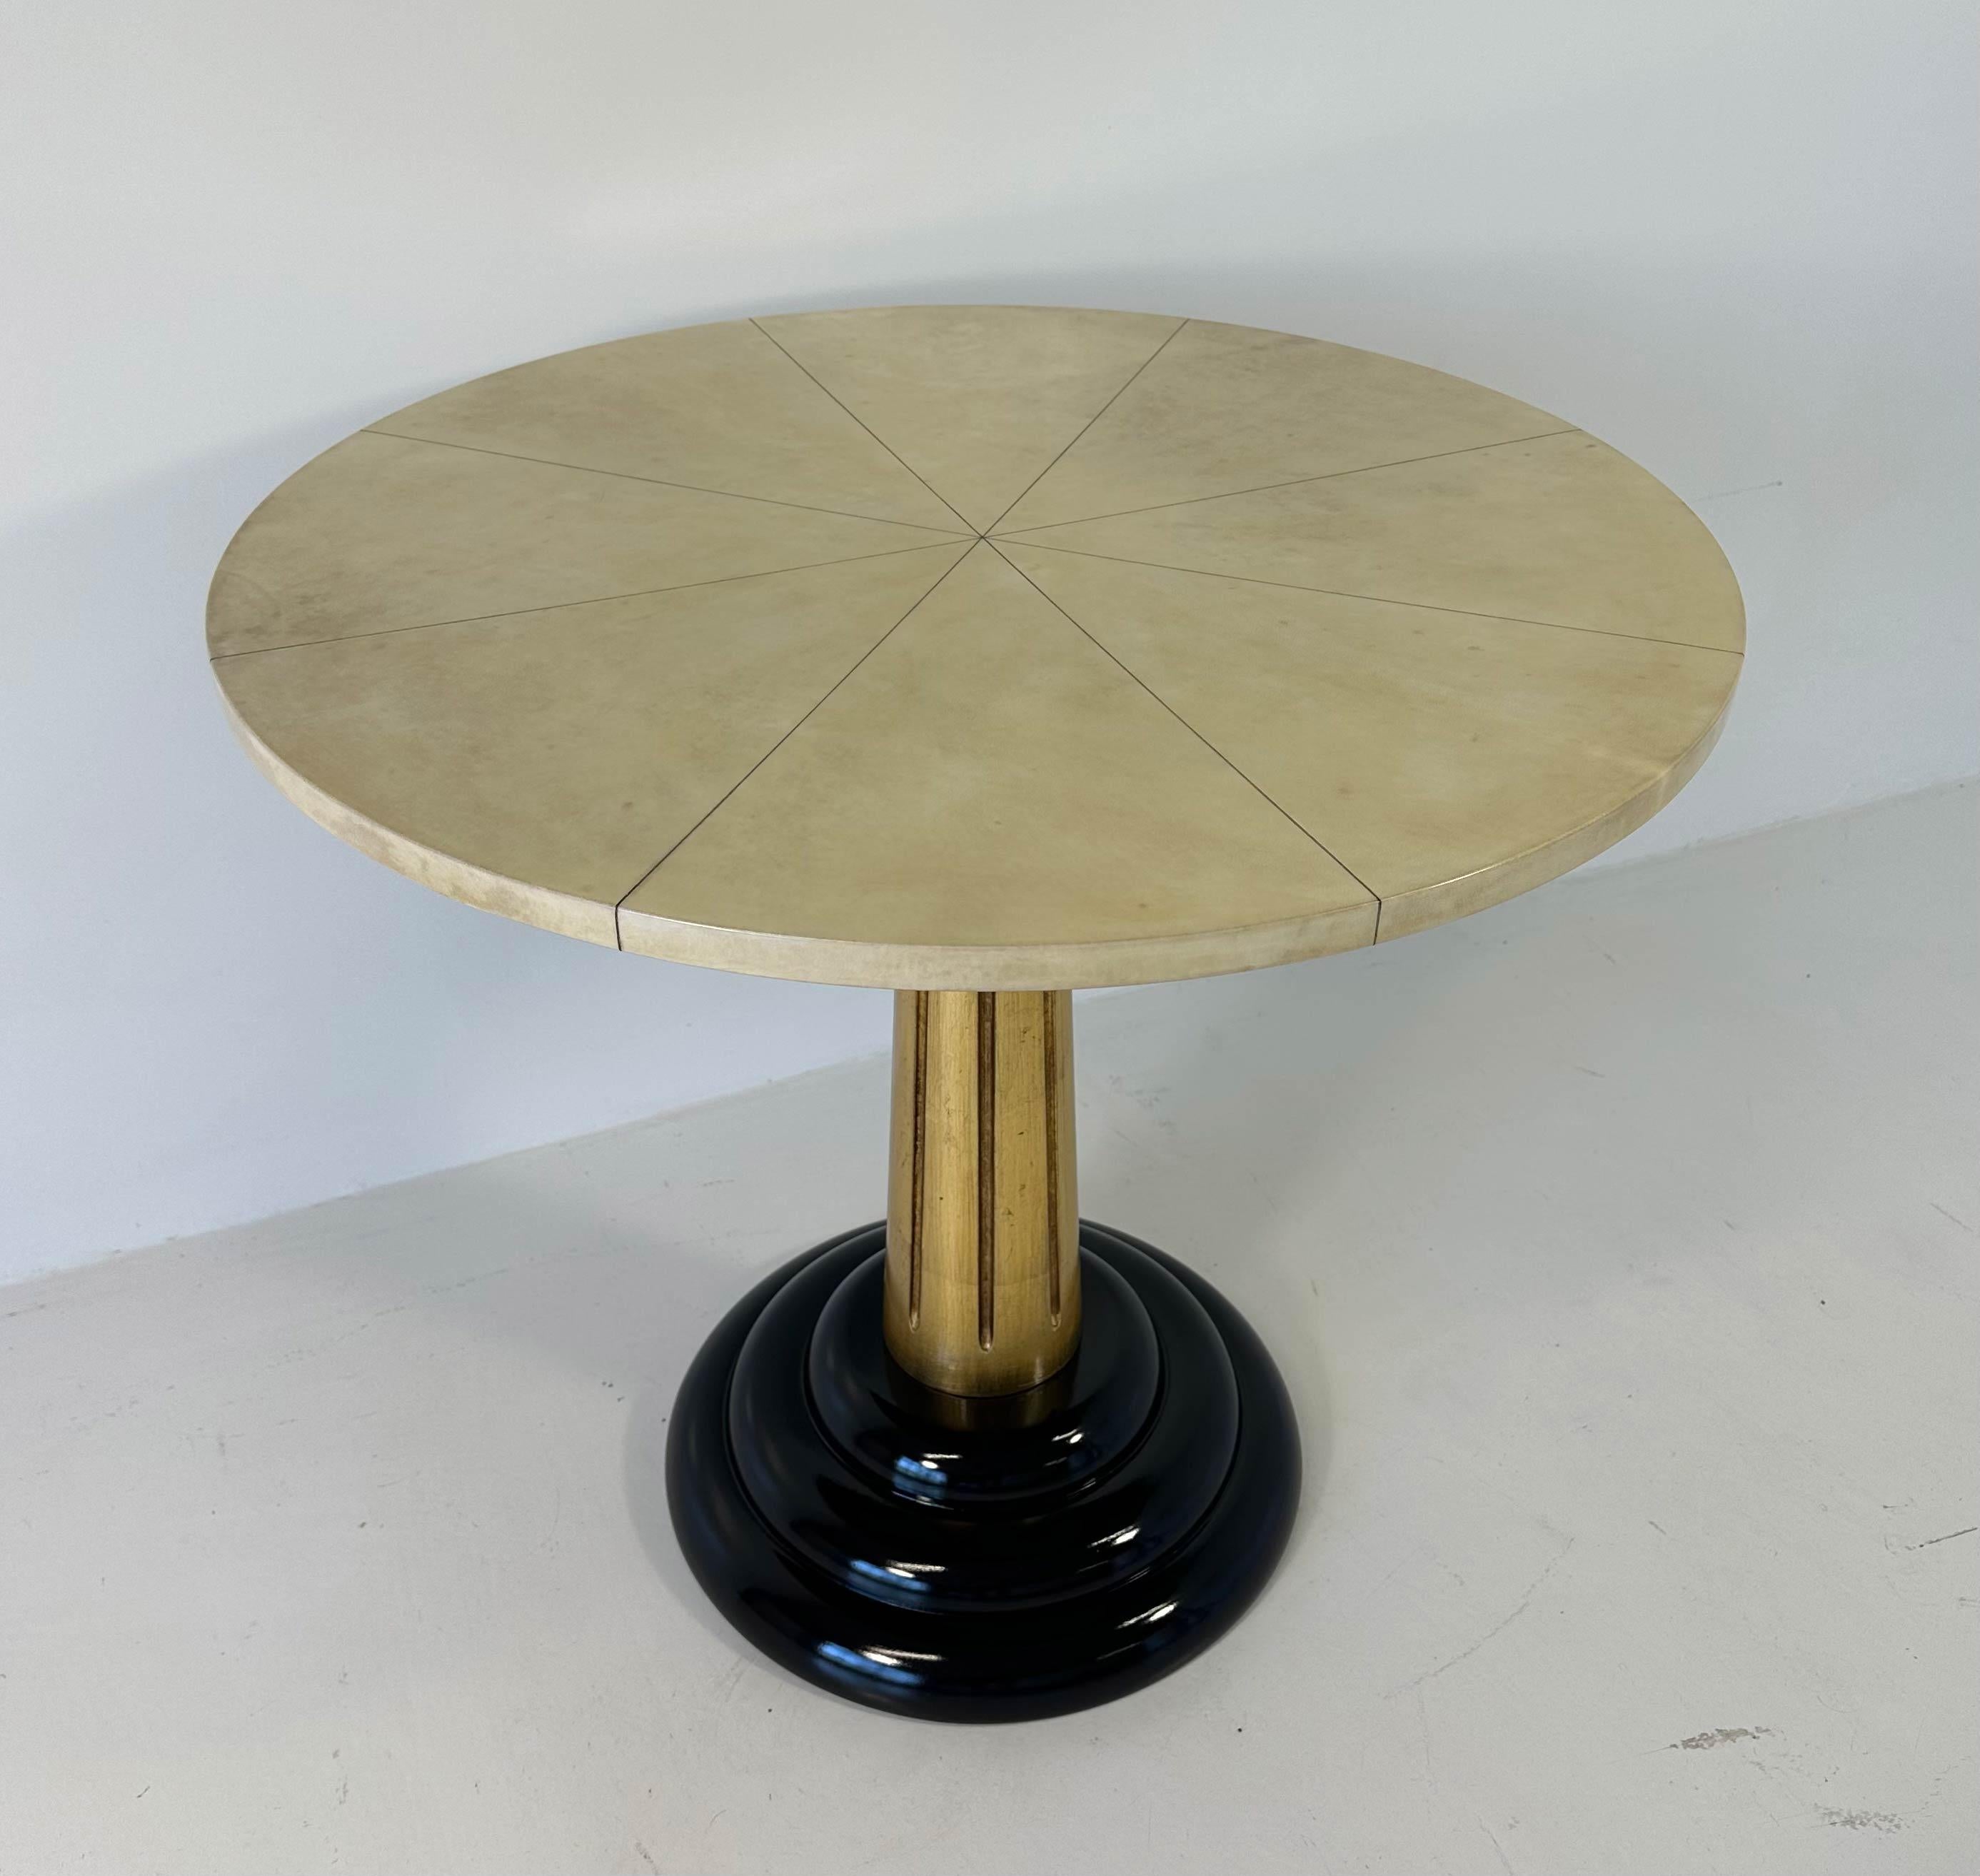 Italian Art Deco Parchment, Gold Leaf and Black Lacquered Coffee Table, 1980s For Sale 5